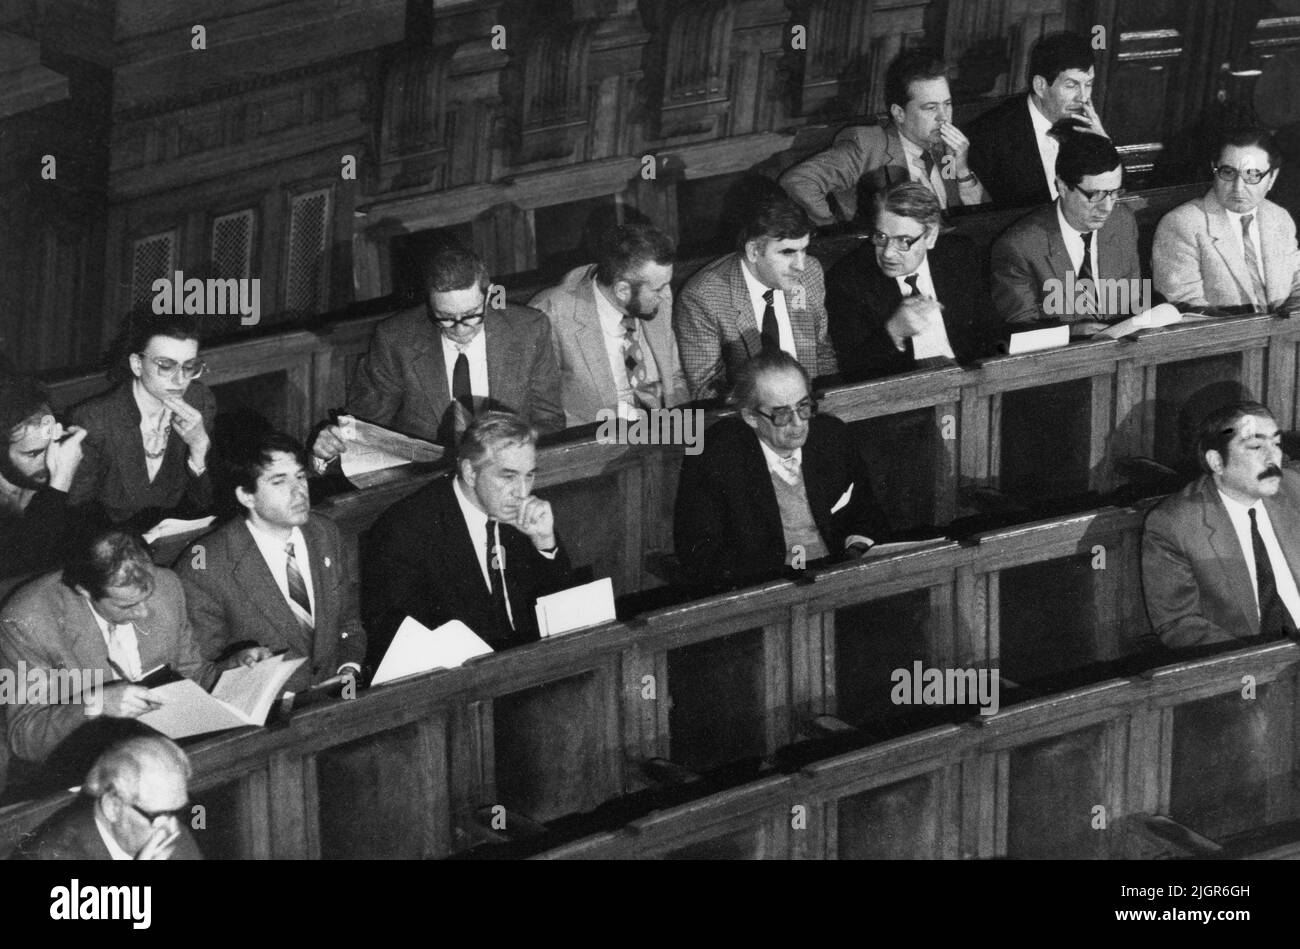 Members of the Romanian Parliament during session in 1990, the first legislature after the fall of the communist regime. Stock Photo